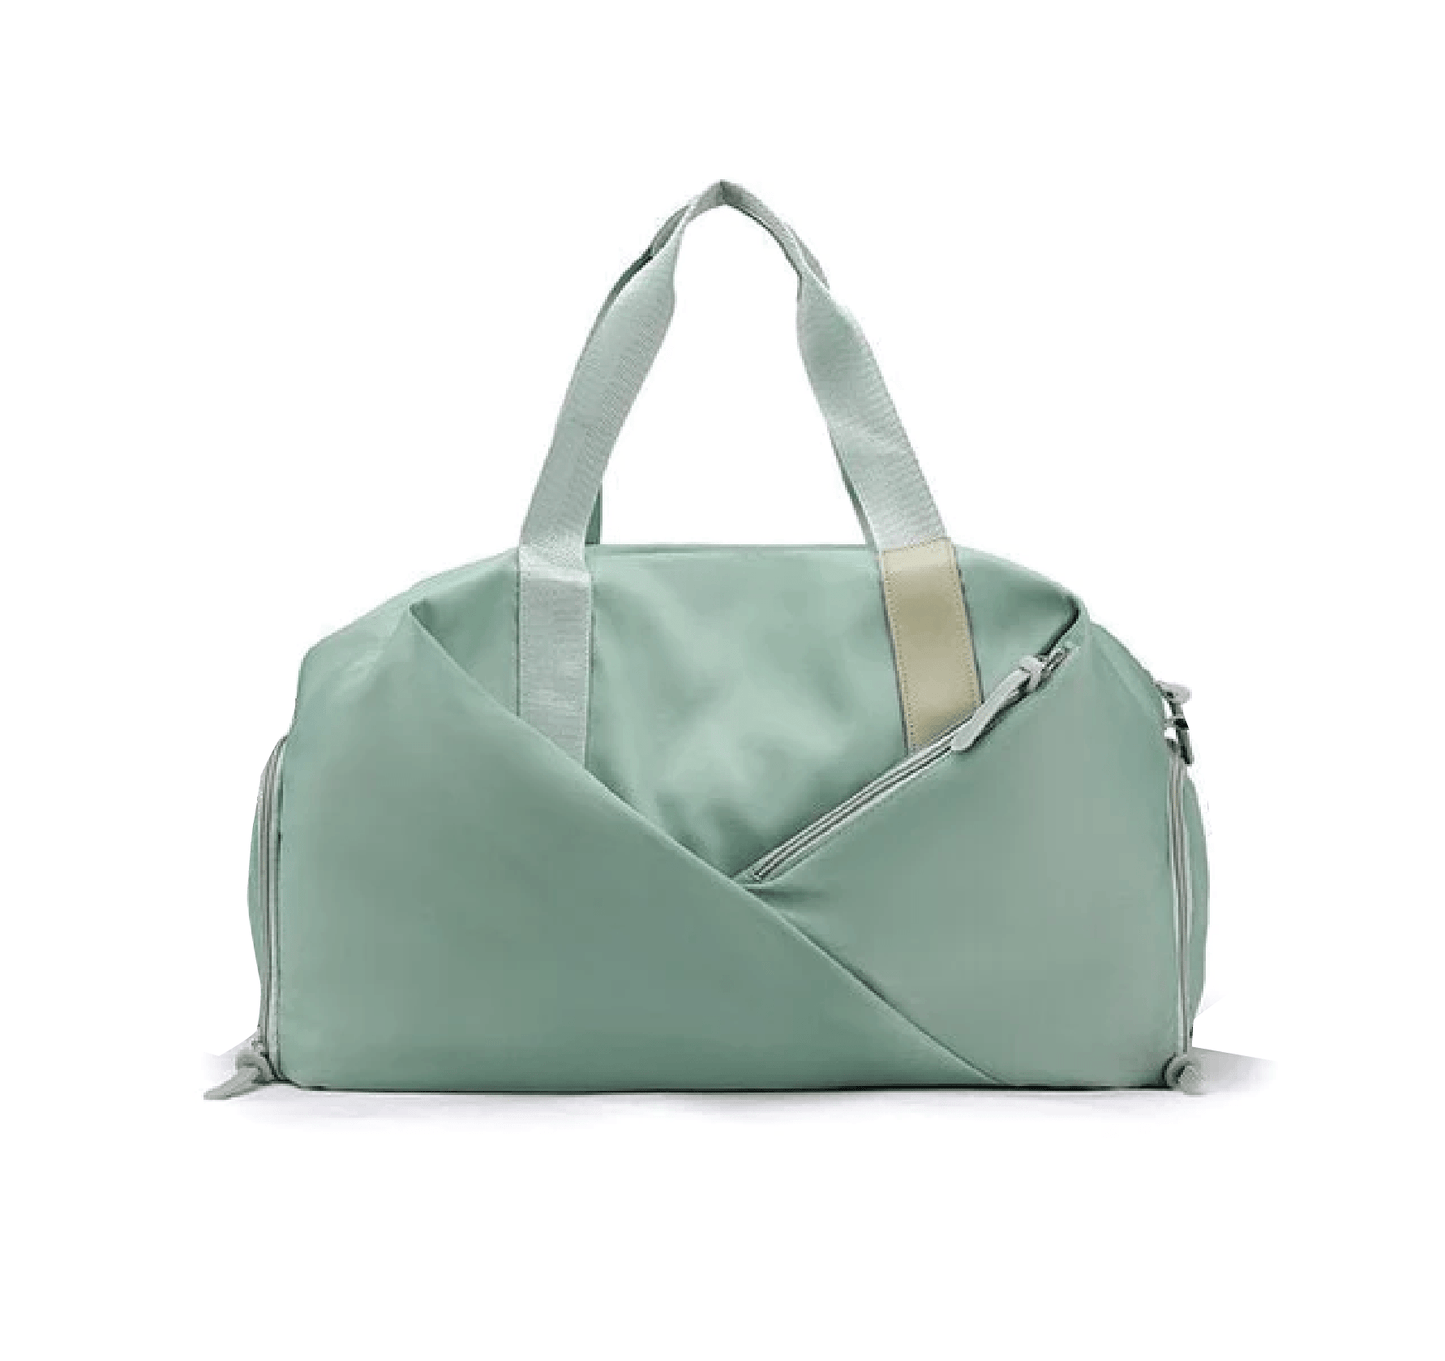 Minty Green Modern Chic Travel/Gym/Swim Bag | Available in four Colors - Supple Room